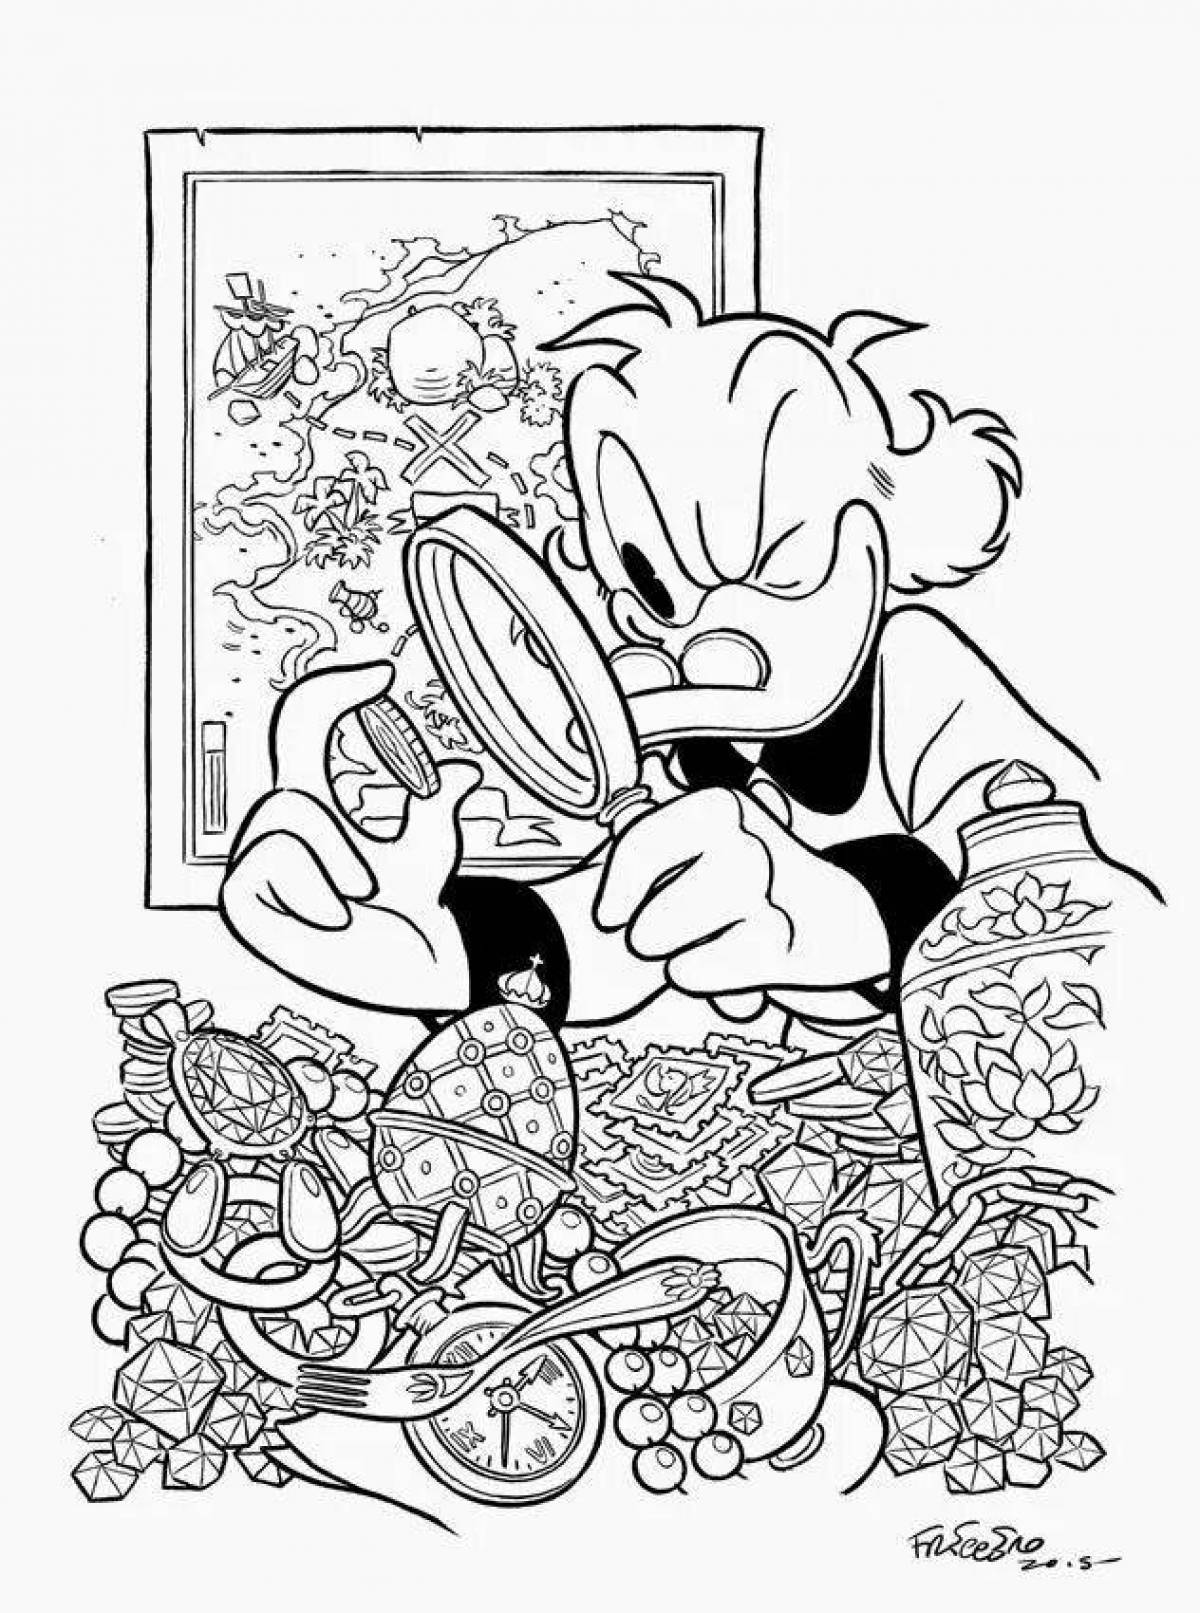 Coloring bright scrooge